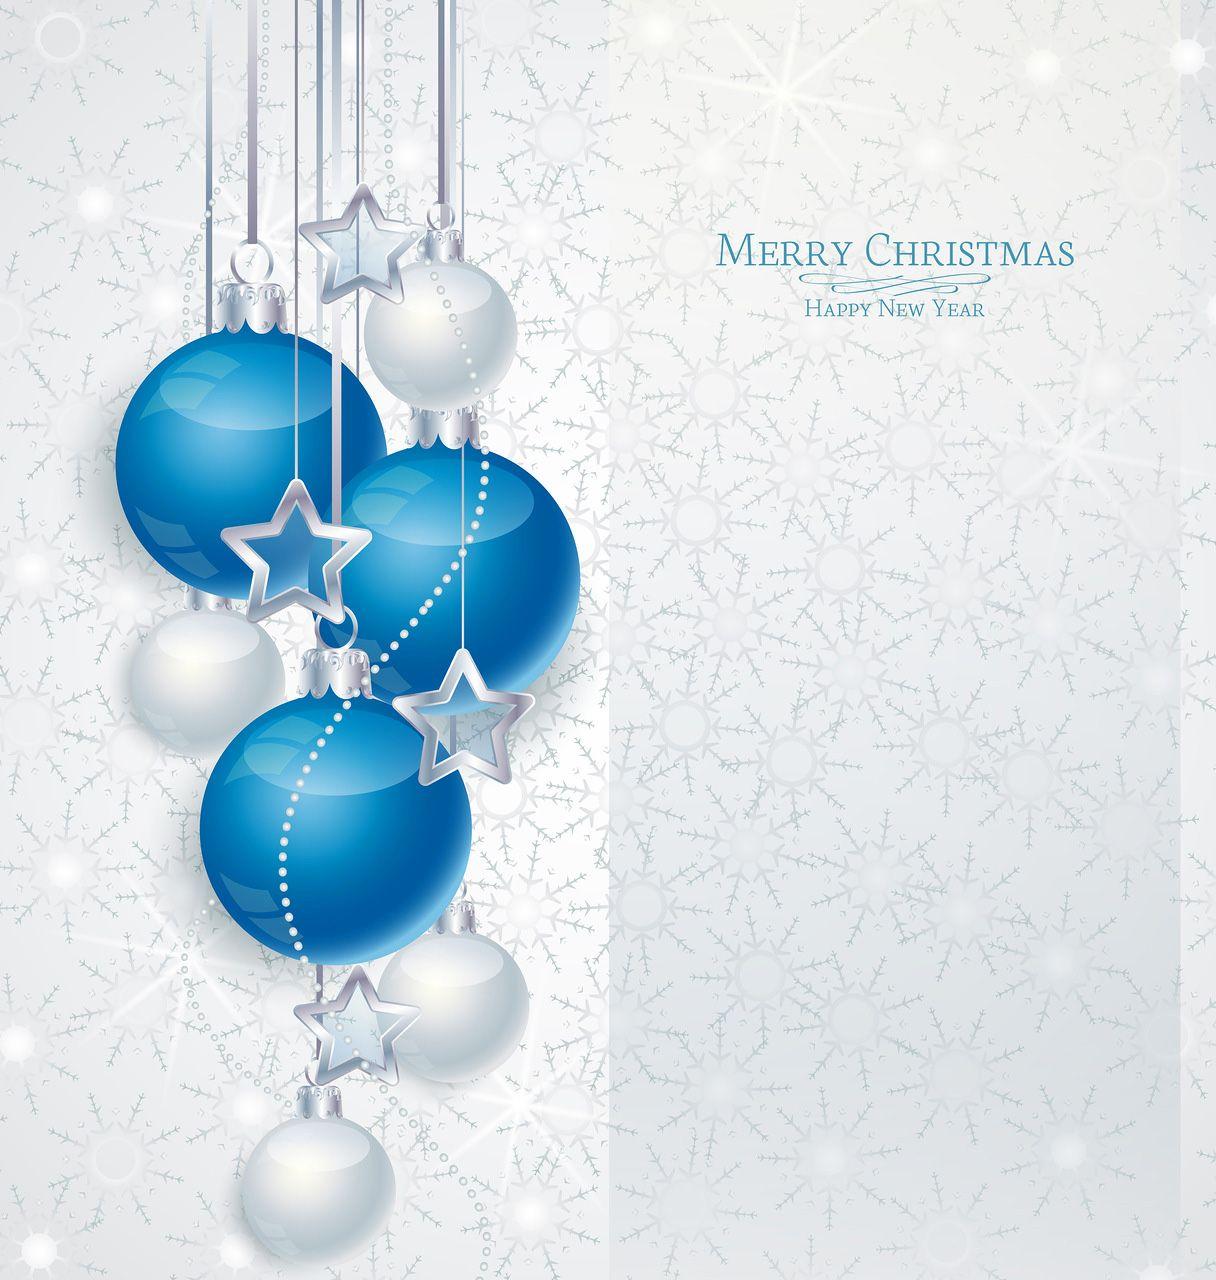 White Christmas Background with Blue Ornaments​-Quality Image and Transparent PNG Free Clipart